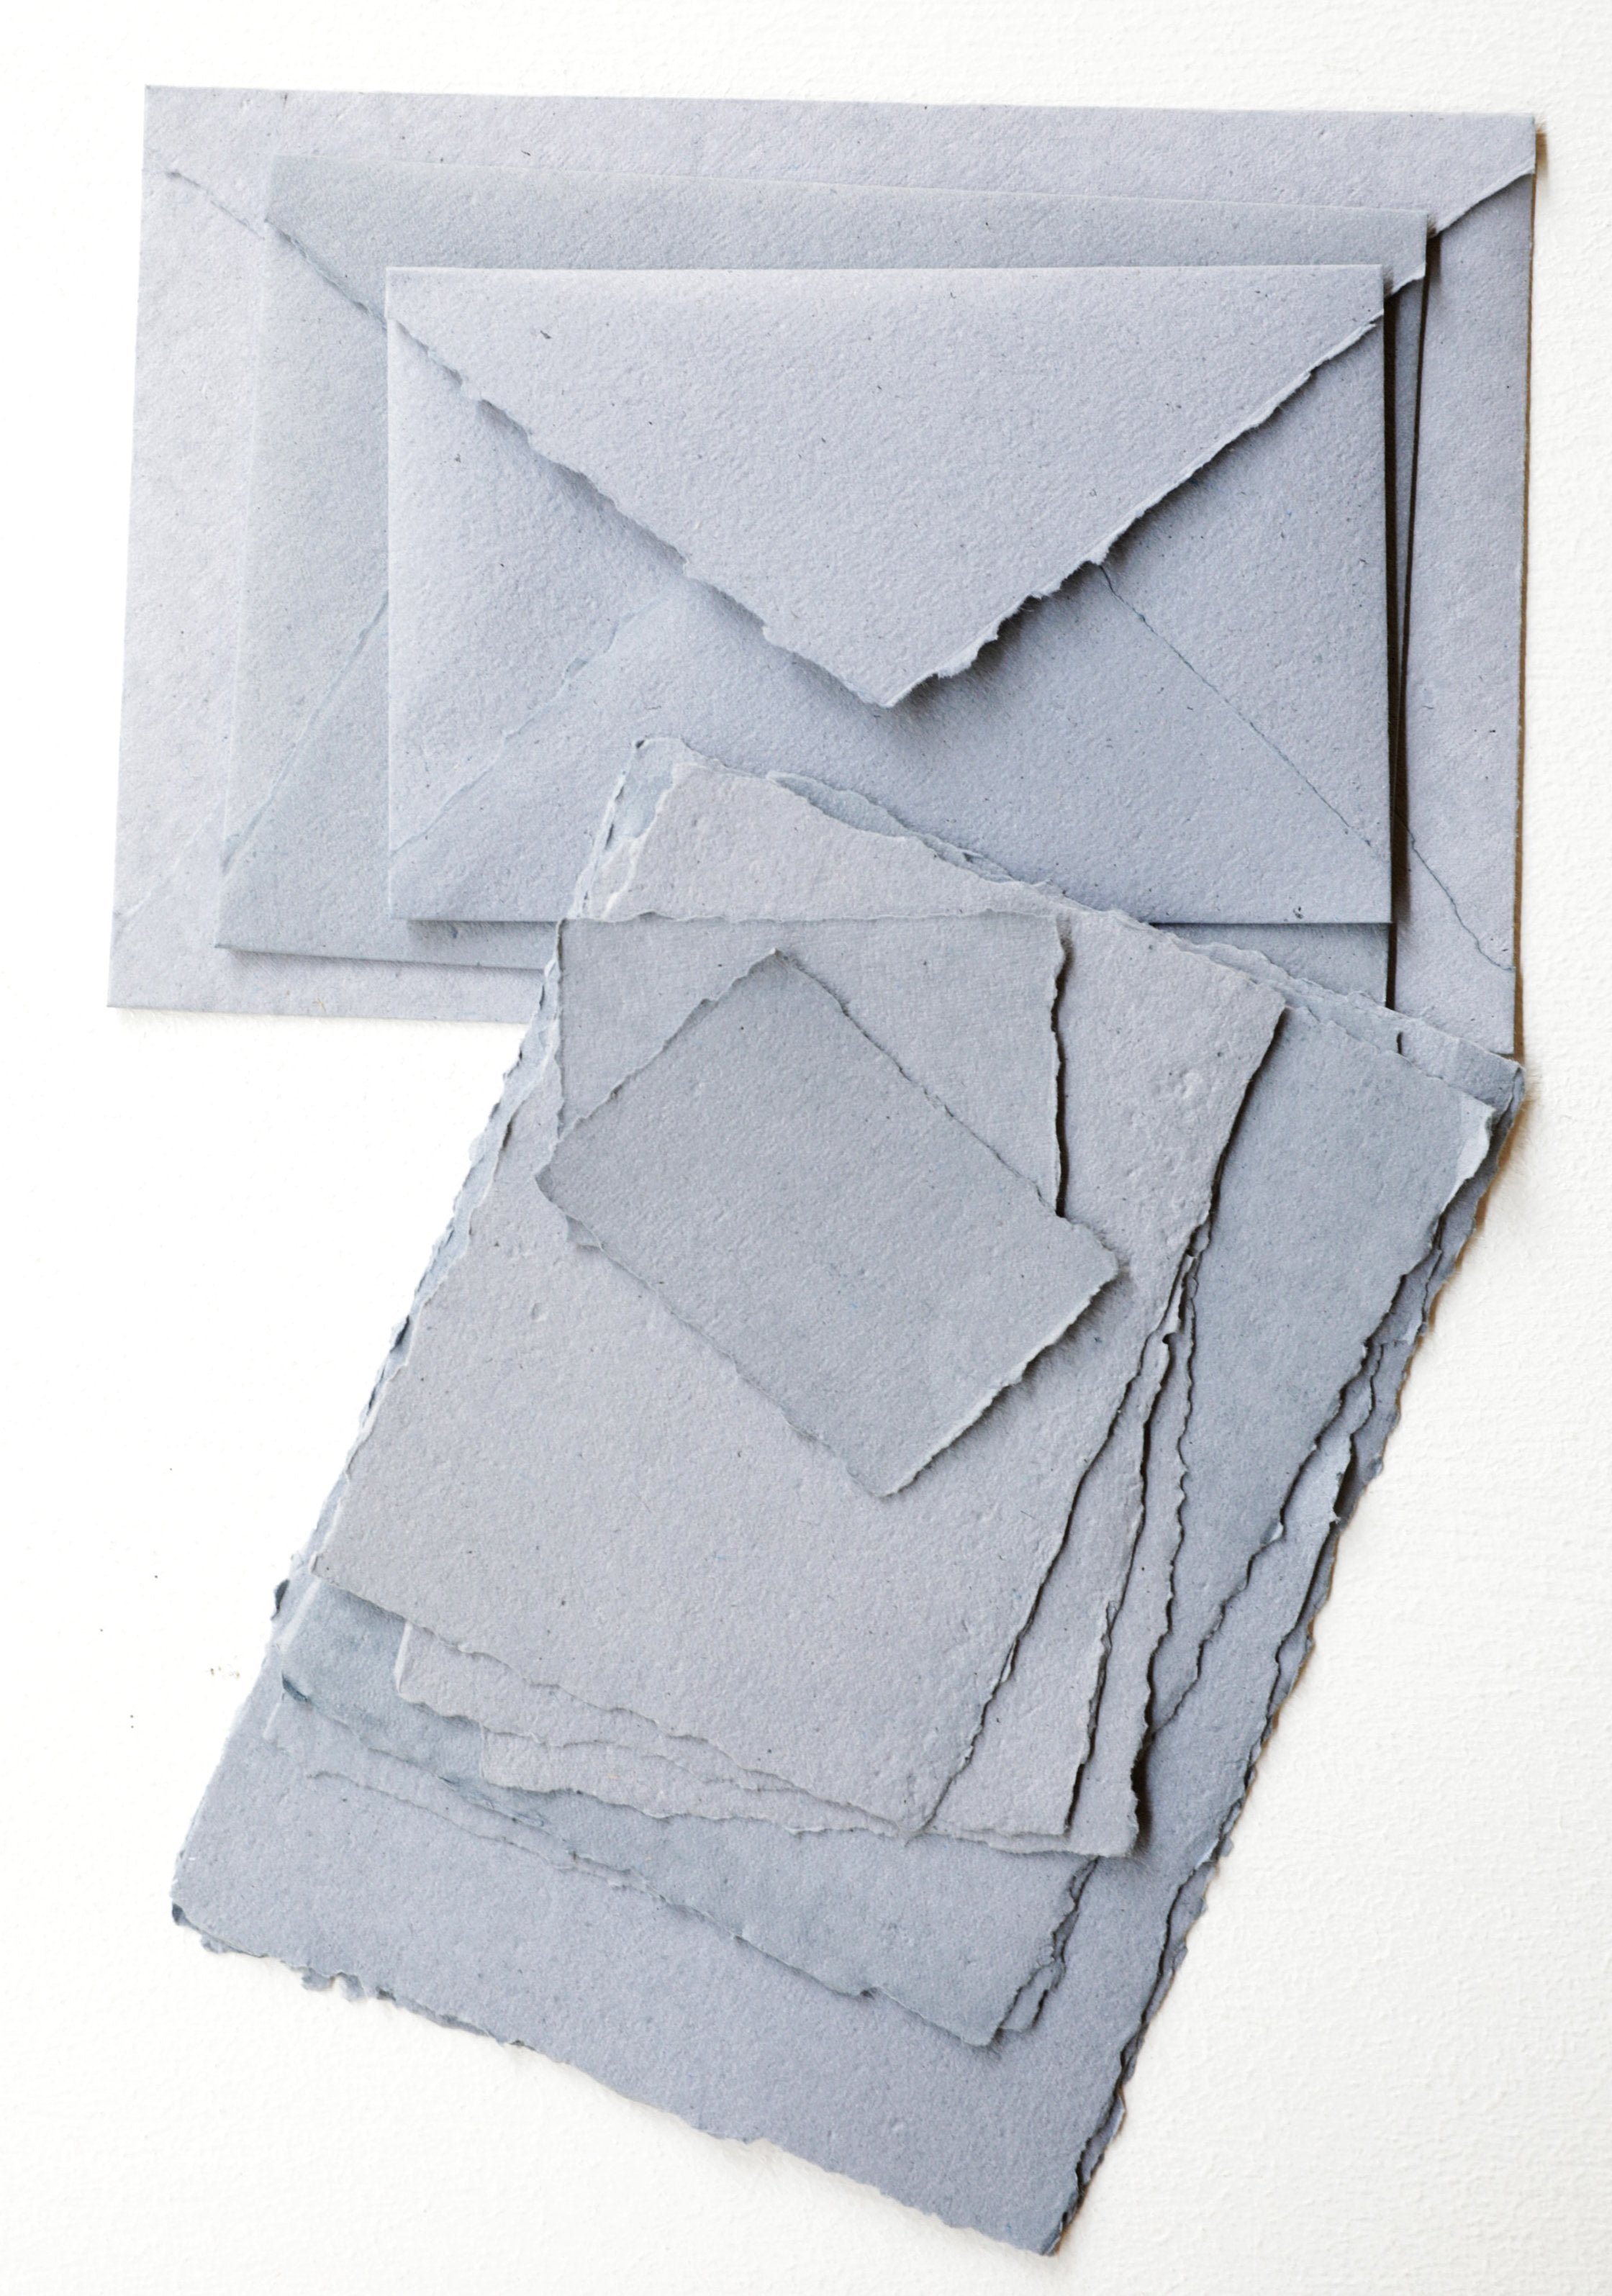 Dusty Blue Handmade Recycled Envelopes - (Deckle Edge or Cut Edge) - Feathers and Stone